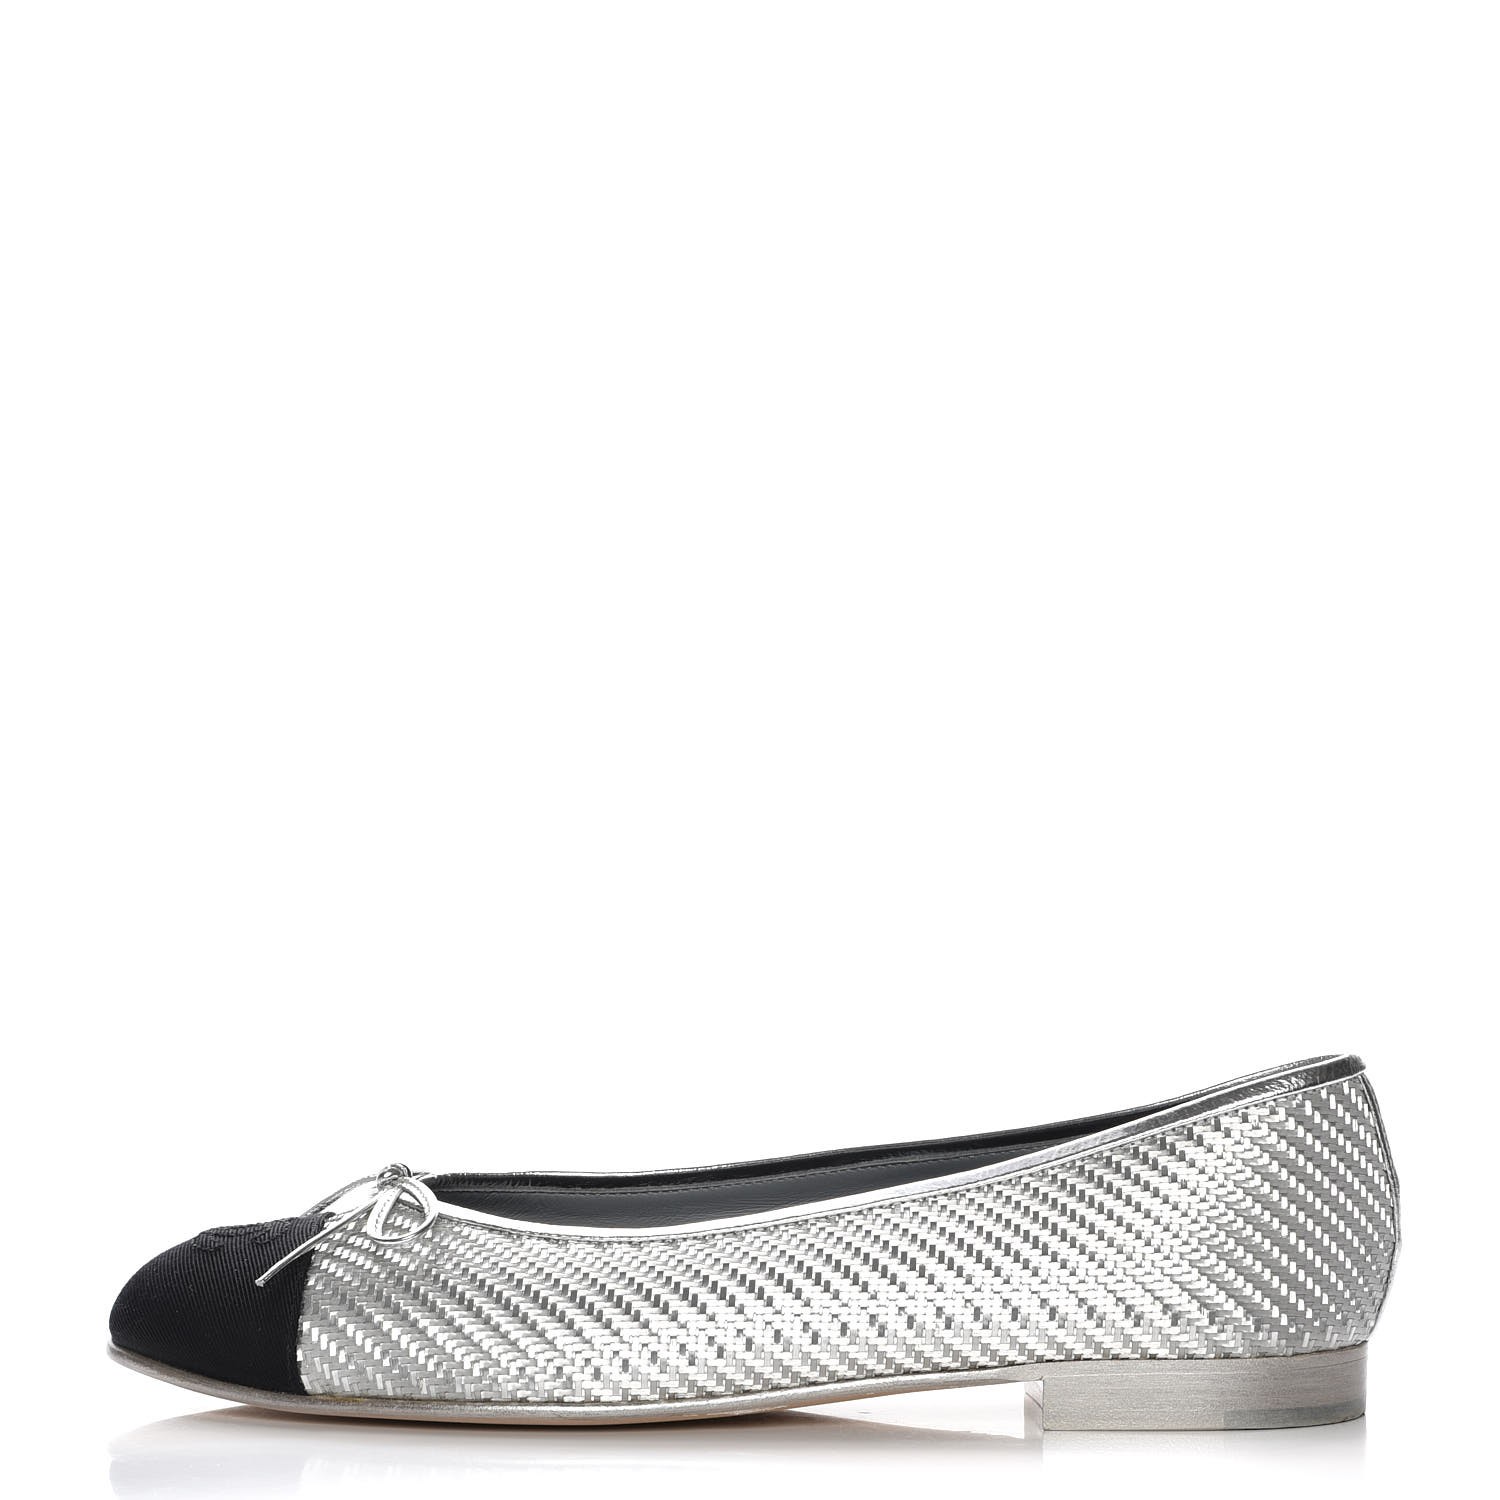 silver chanel flats